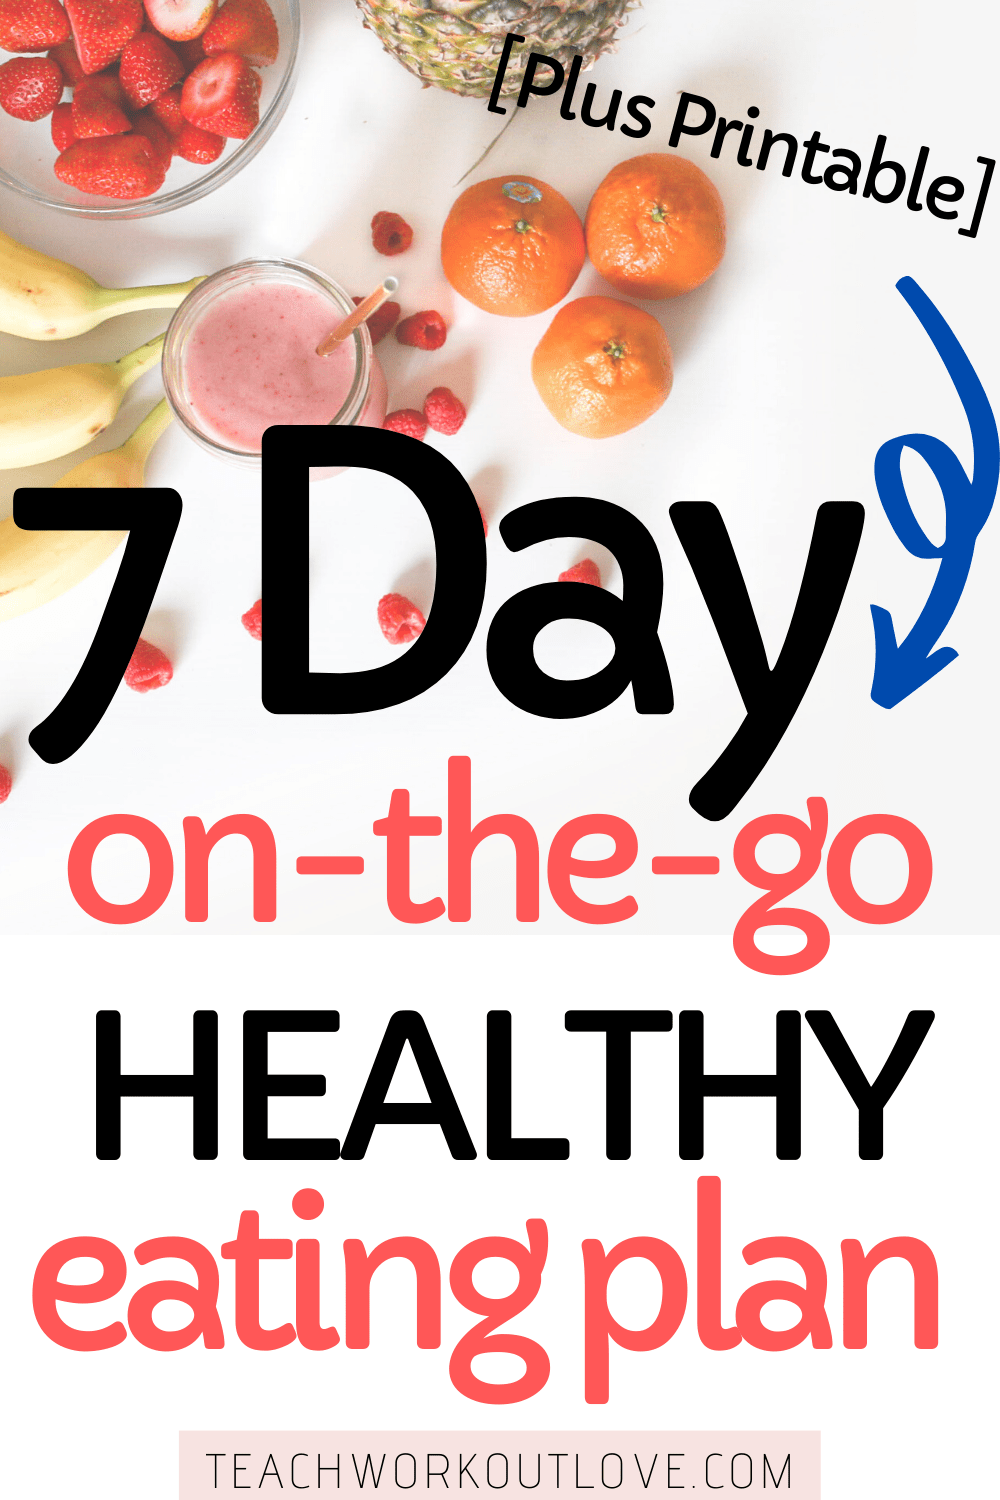 We have put together a 7-day on-the-go healthy eating plan and an easy plan to stick with, plus a free printable meal planning worksheet!